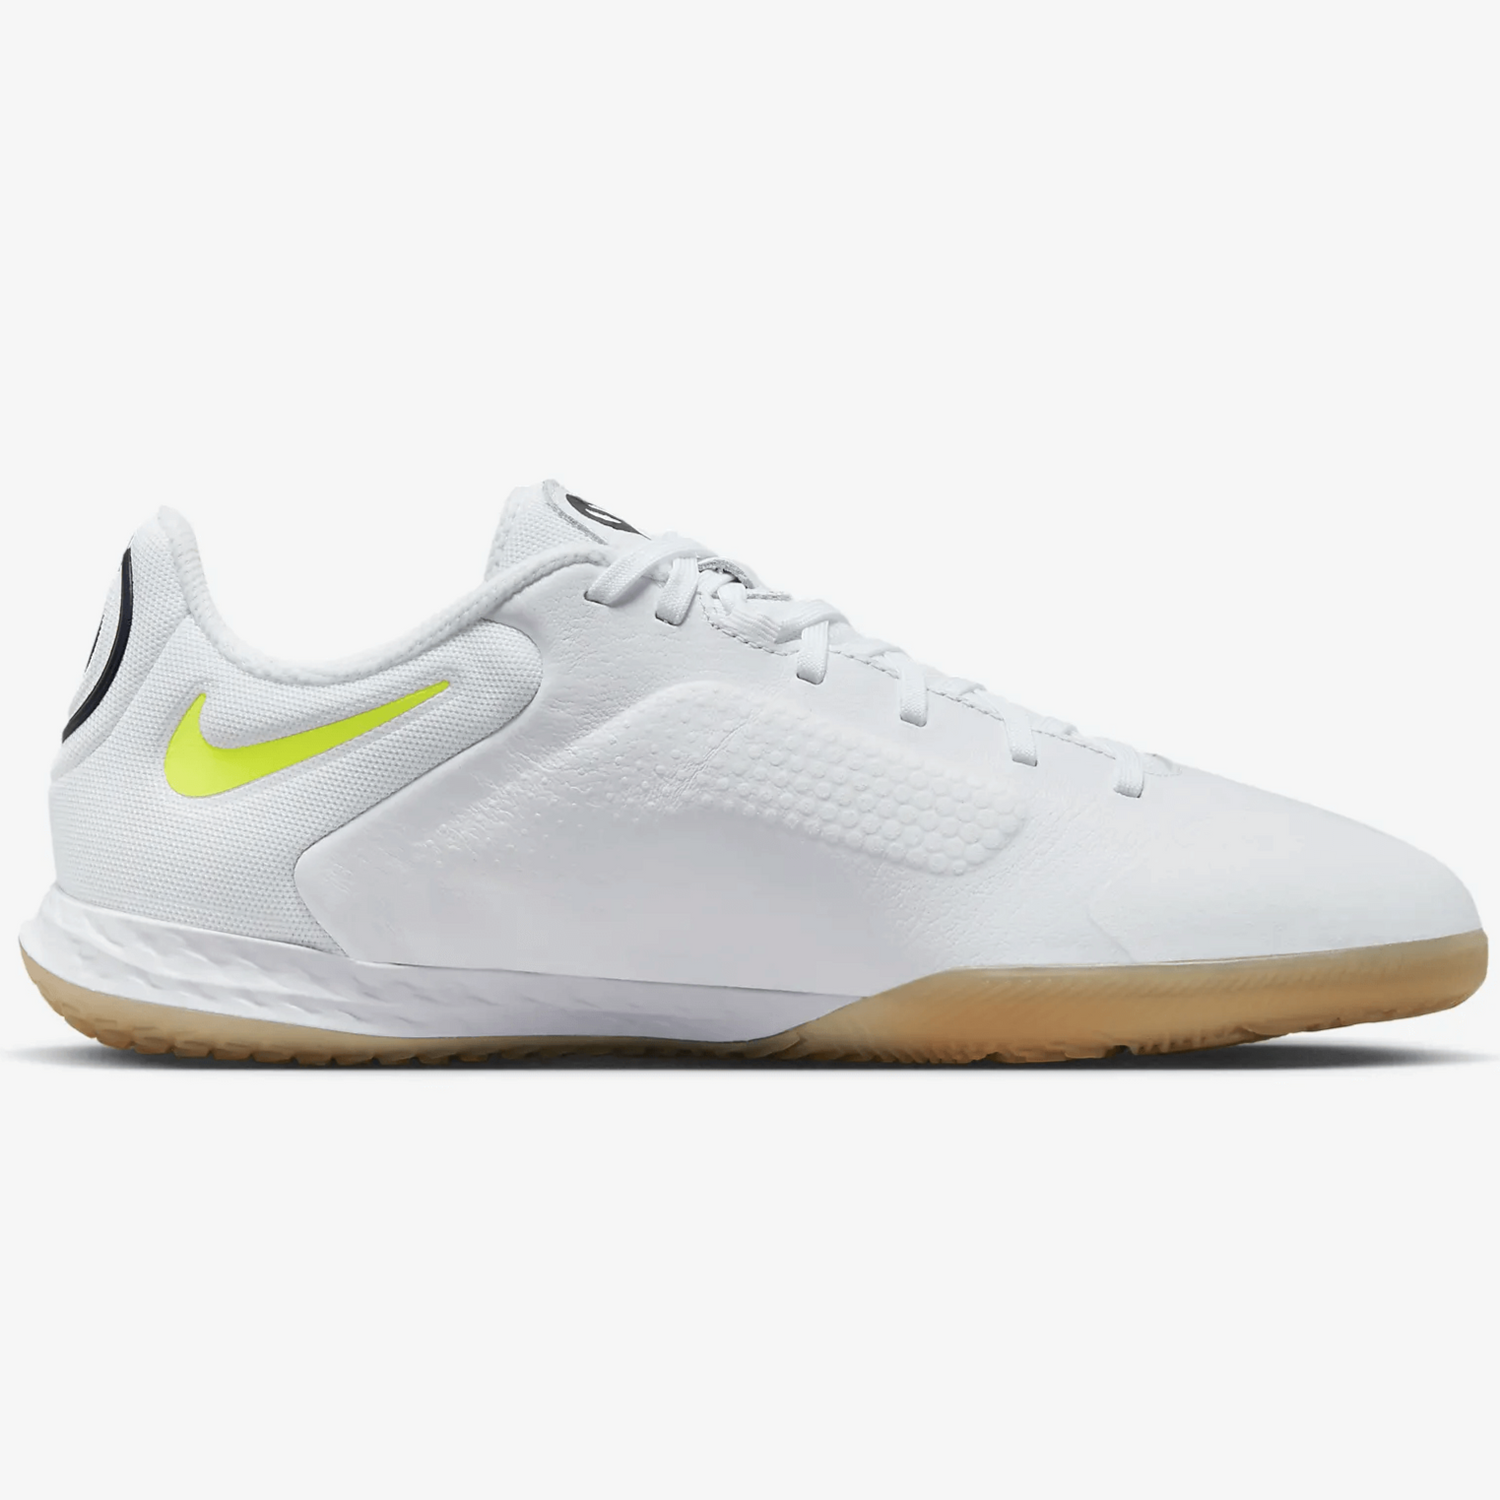 Nike React Legend 9 Pro Indoor - Small Sided Pack (FA23) (Side 2)